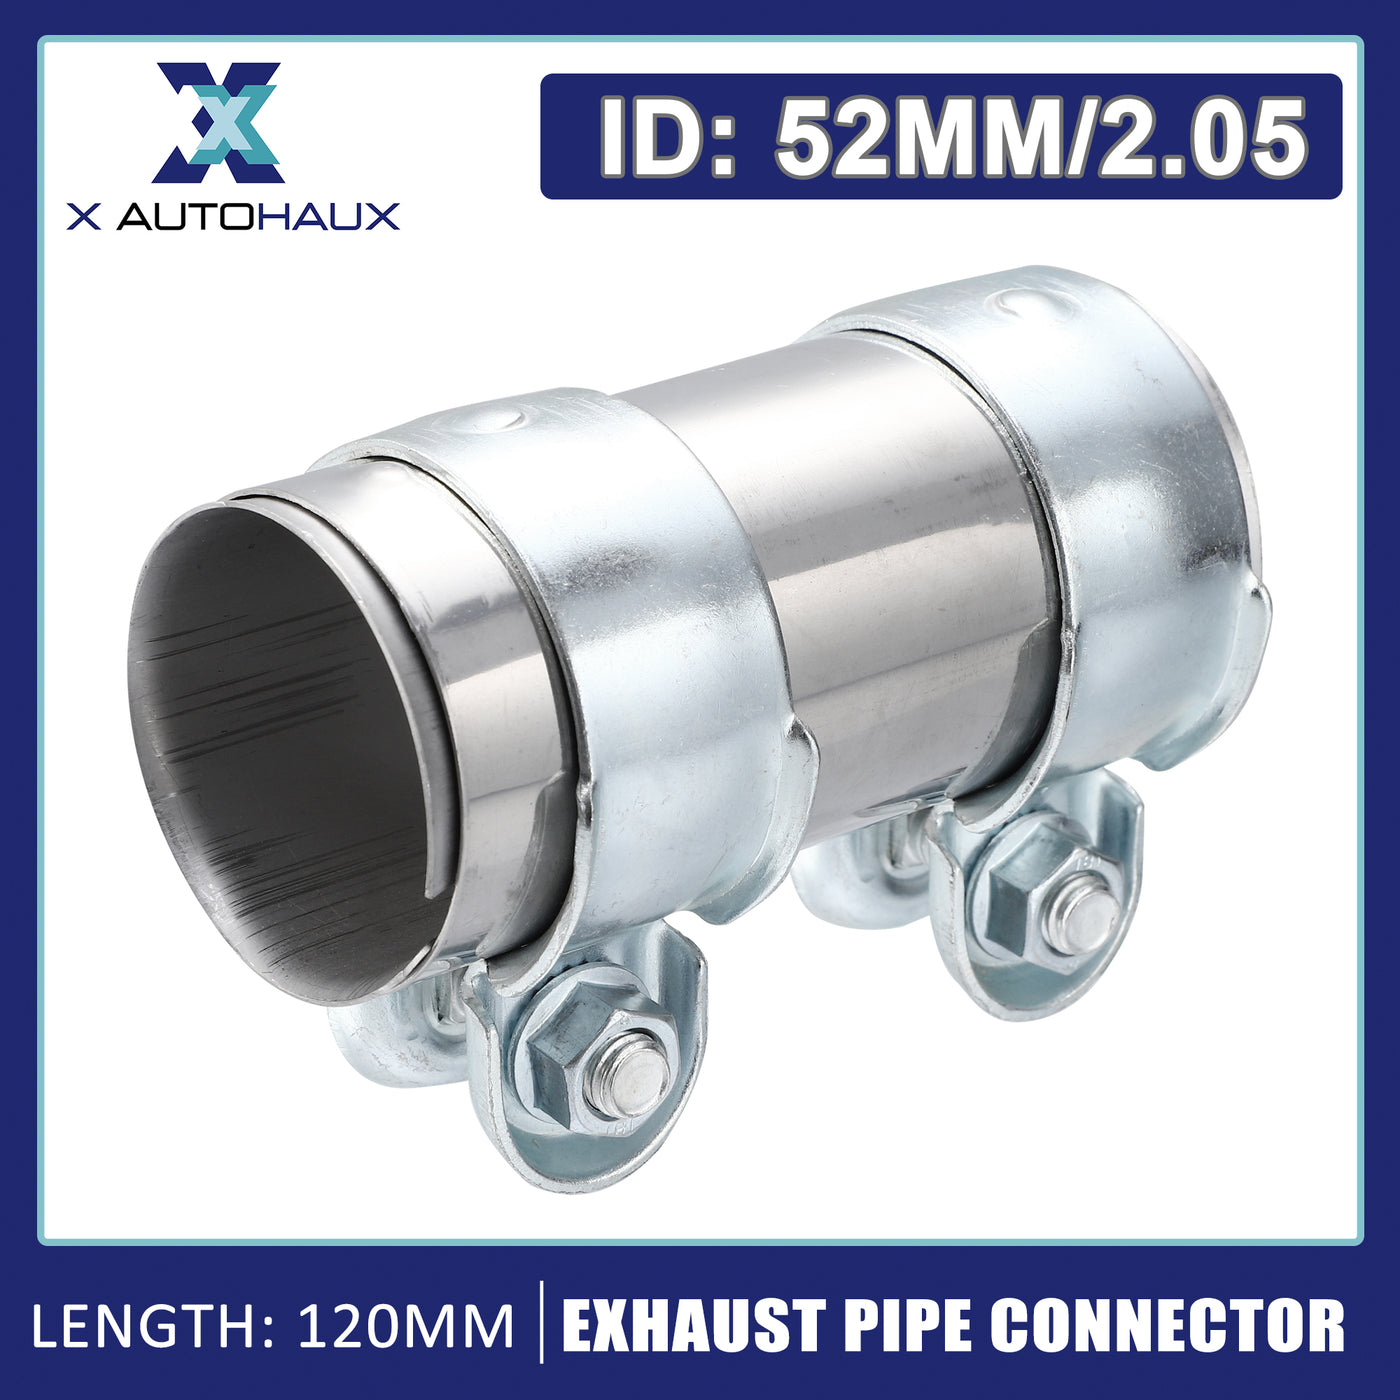 X AUTOHAUX Fit 48-52mm OD Adjustable Exhaust Pipe Tube Joiner Connector Sleeve Clamp 120mm Length